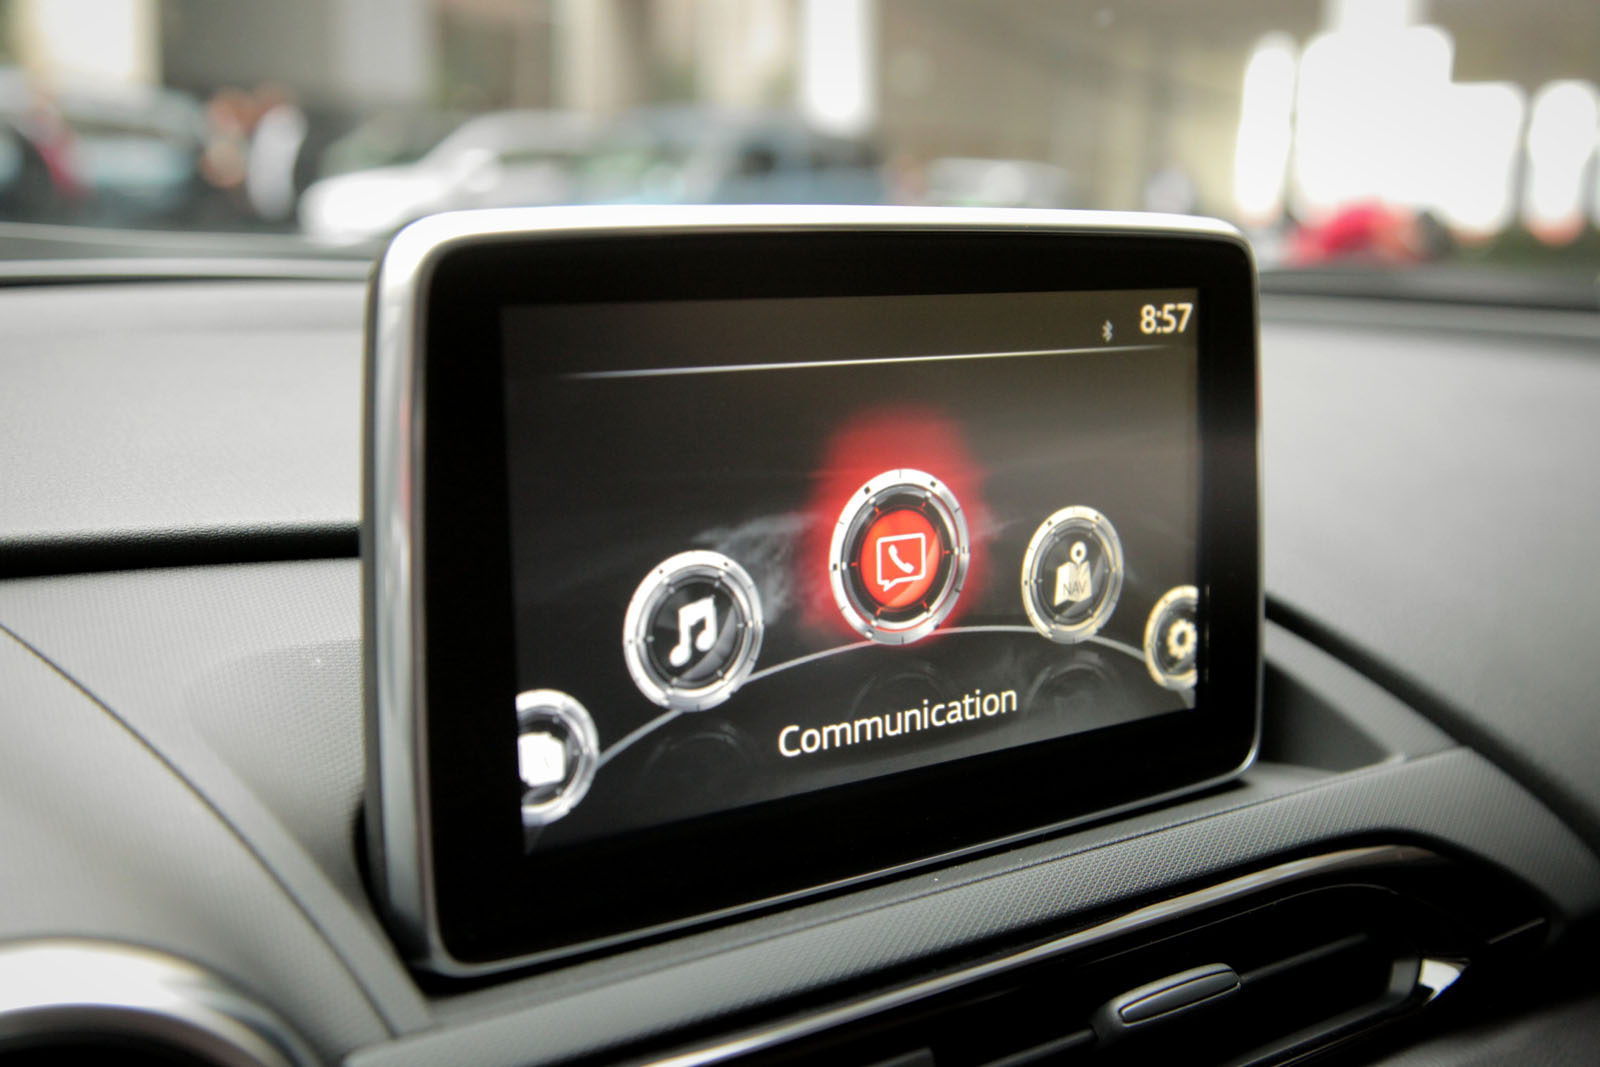 Mazda CONNECT Navigation Repair Service in Wilton Manors FL - 786-355-7660